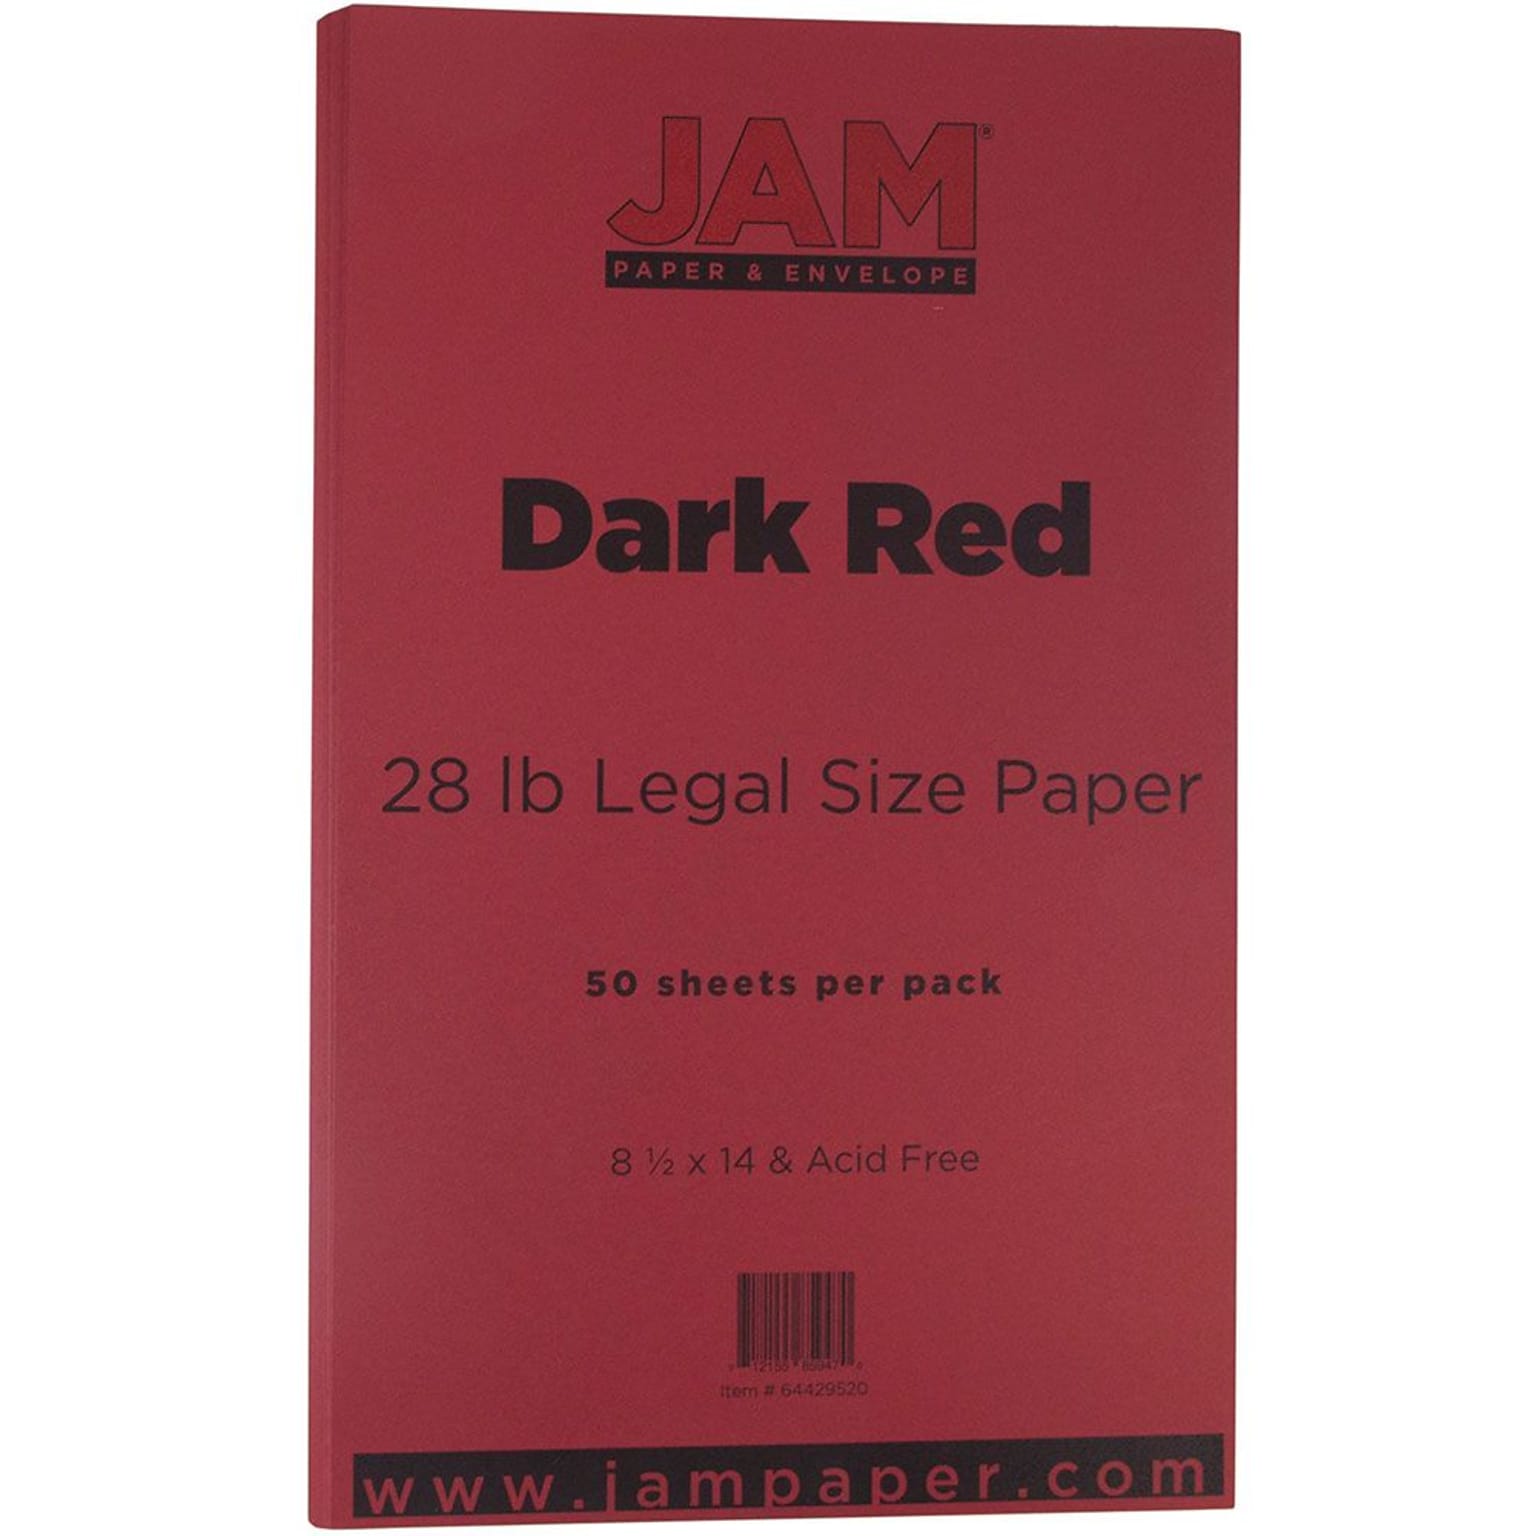 JAM Paper Matte Colored Paper, 28 lbs., 8.5 x 14, Dark Red, 50 Sheets/Pack (64429520)